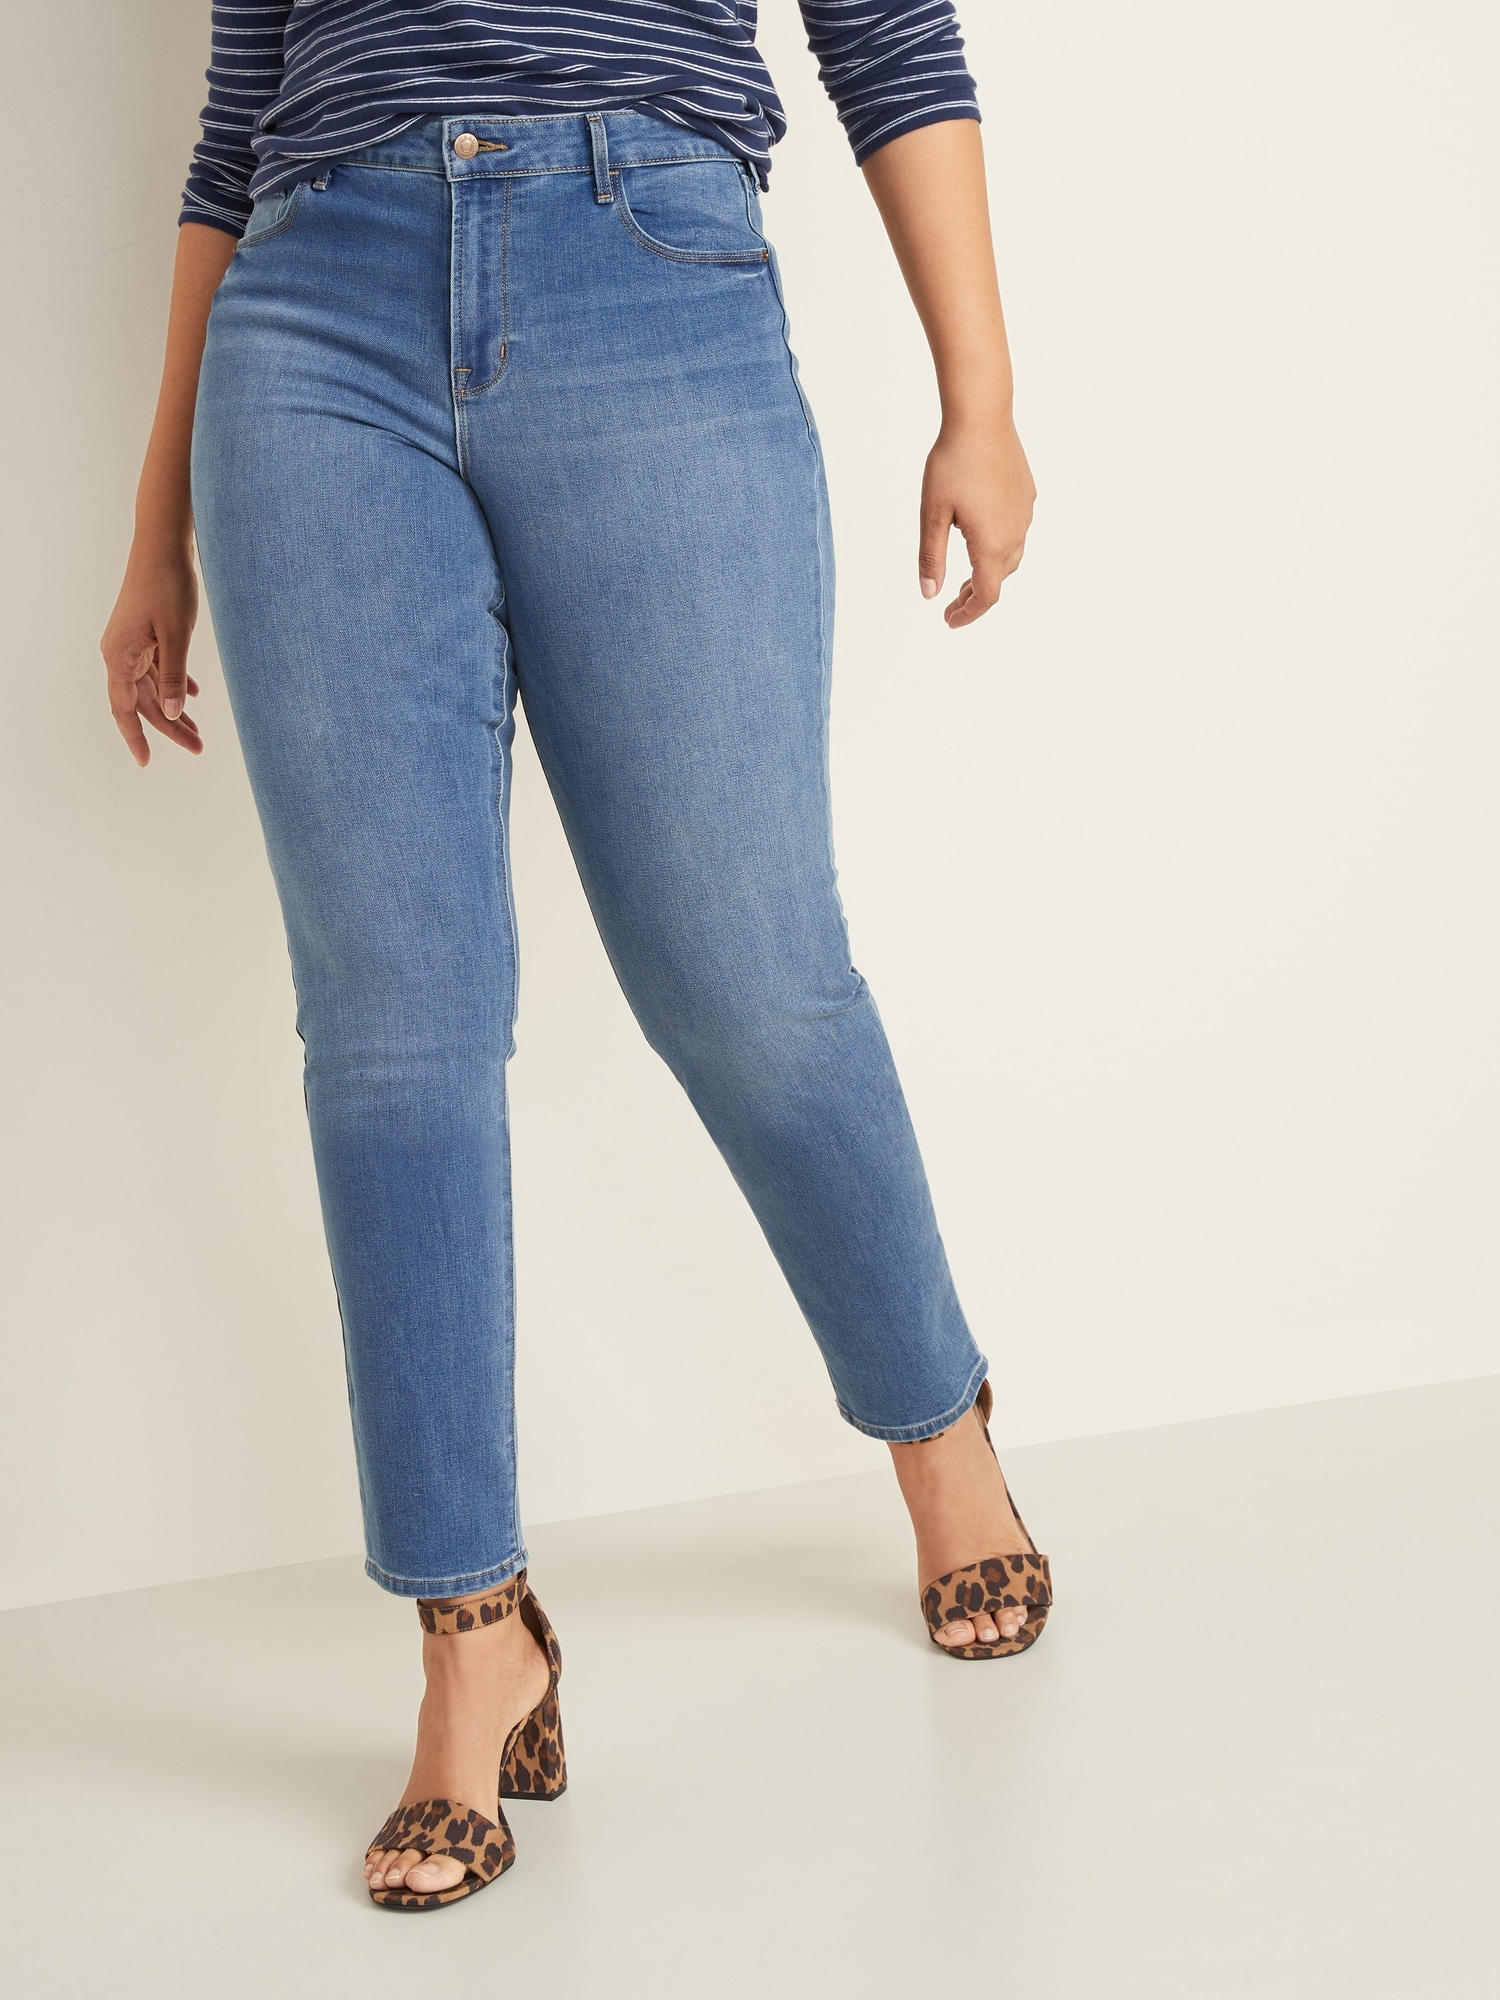 high rise power jean old navy